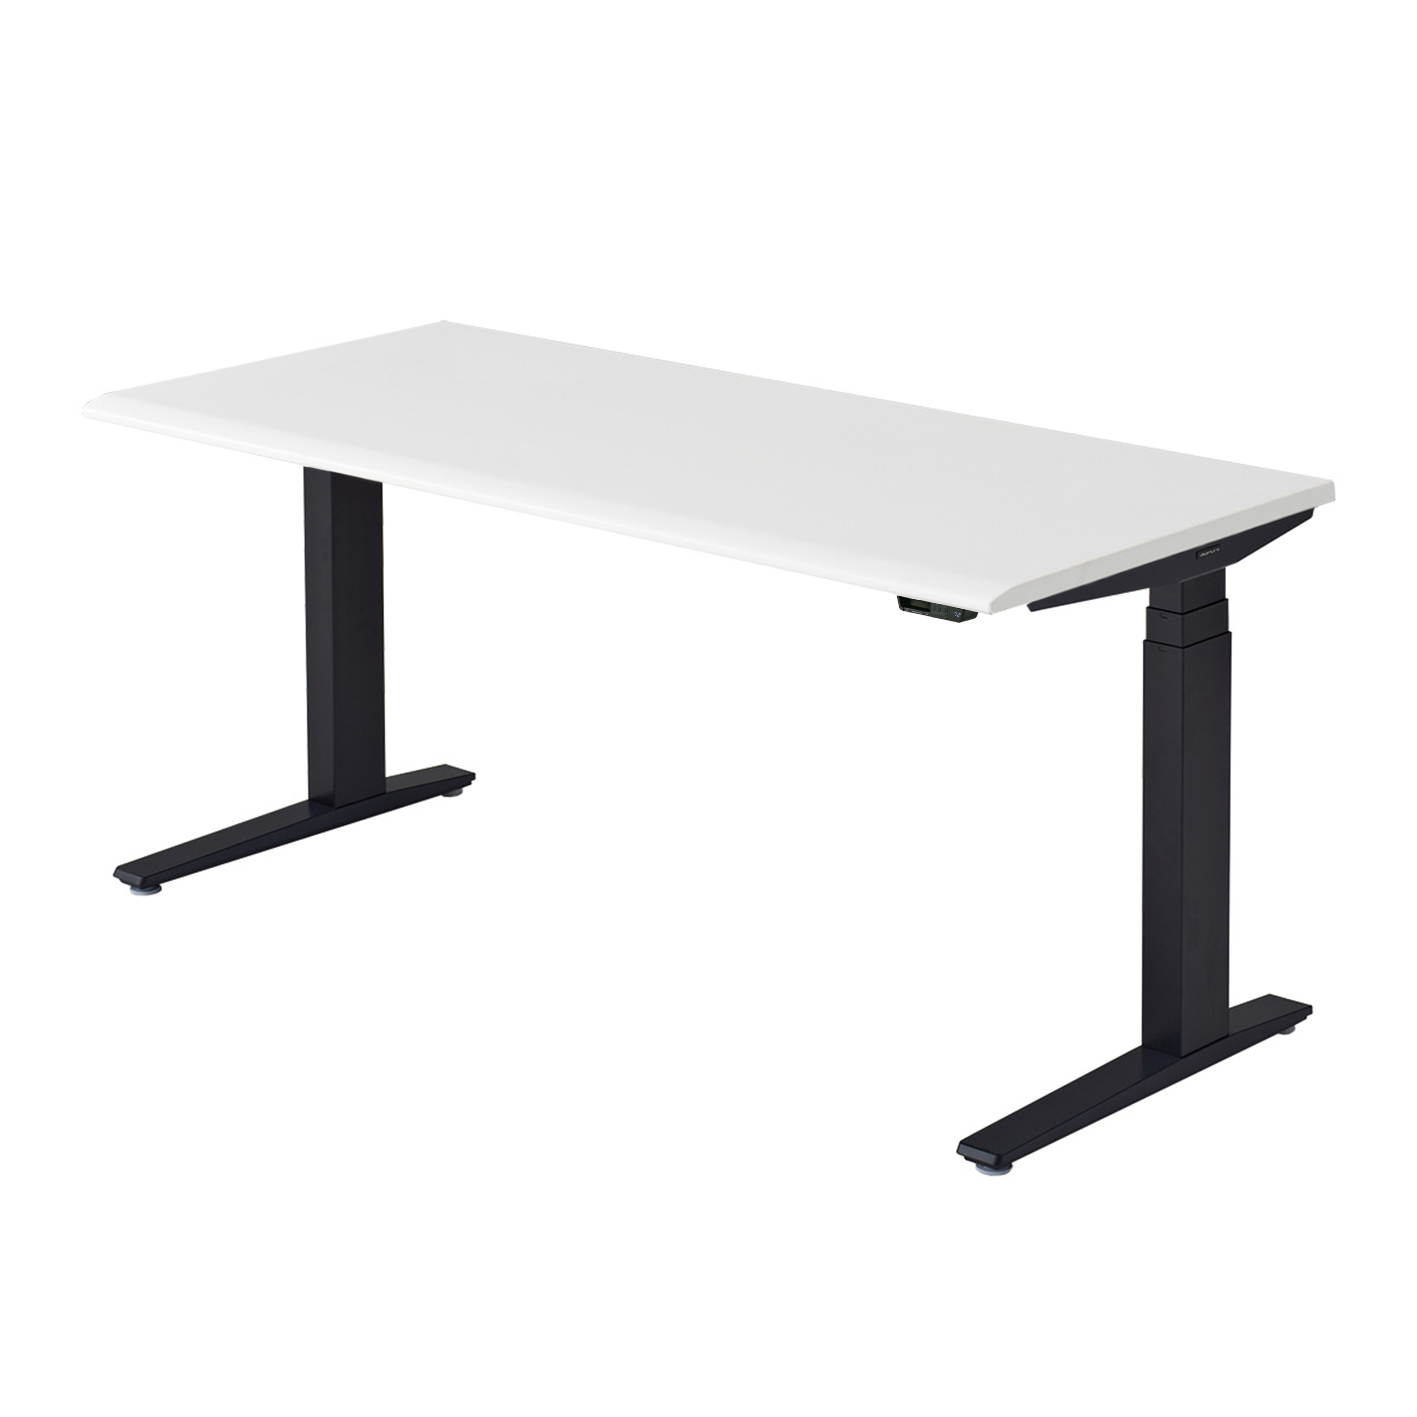 height adjustable table with white tabletop